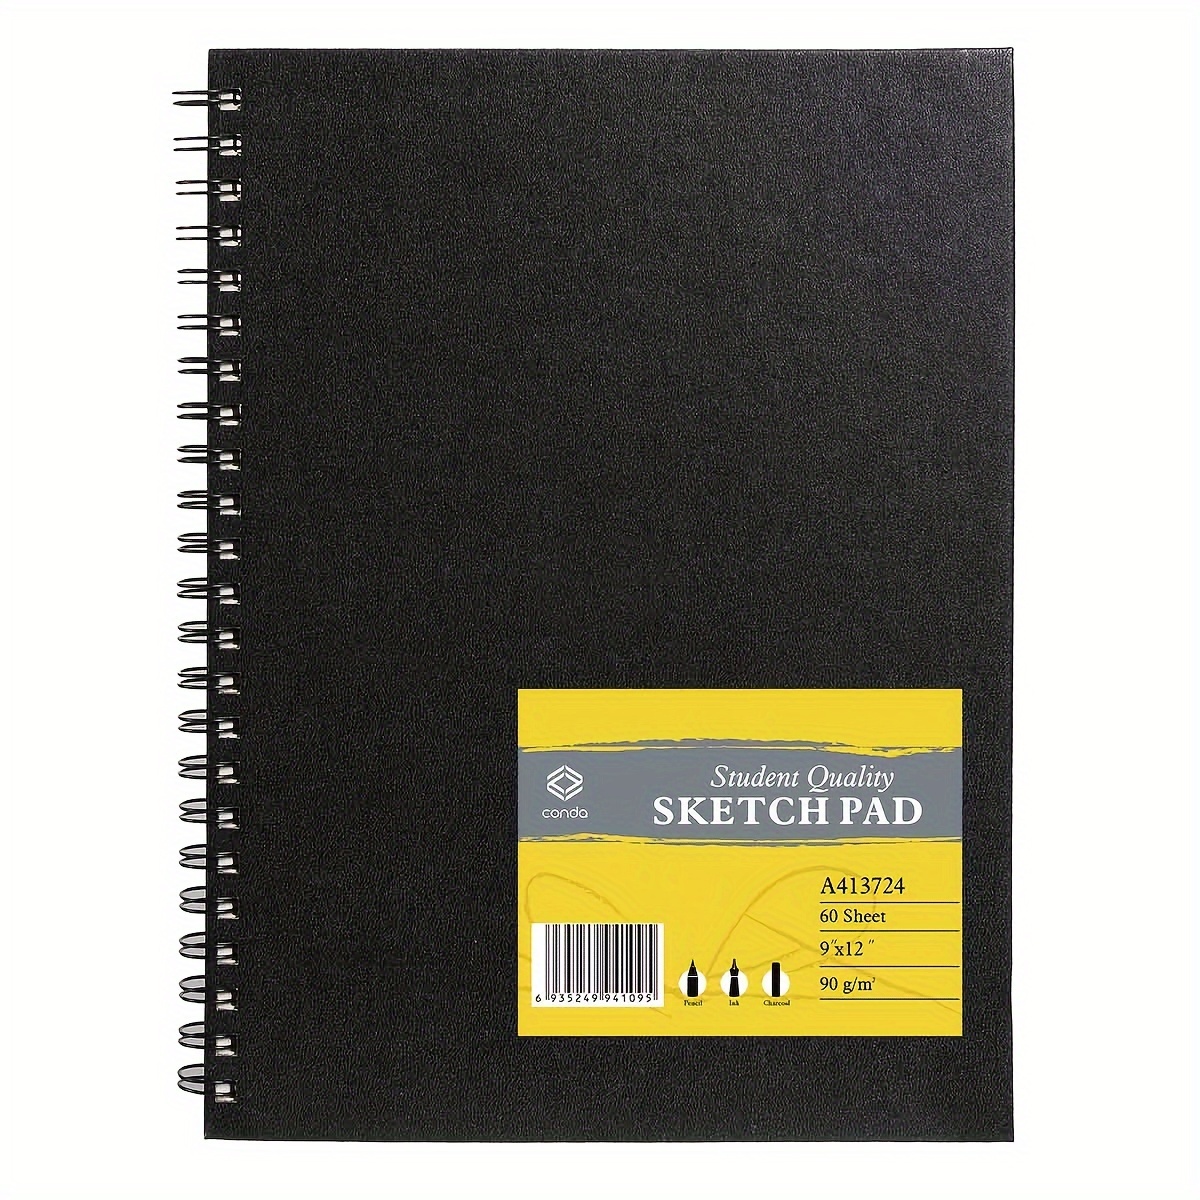 Professional Sketchbook Thick Paper Spiral Notebook Art School Supplies  Pencil Drawing Notepad